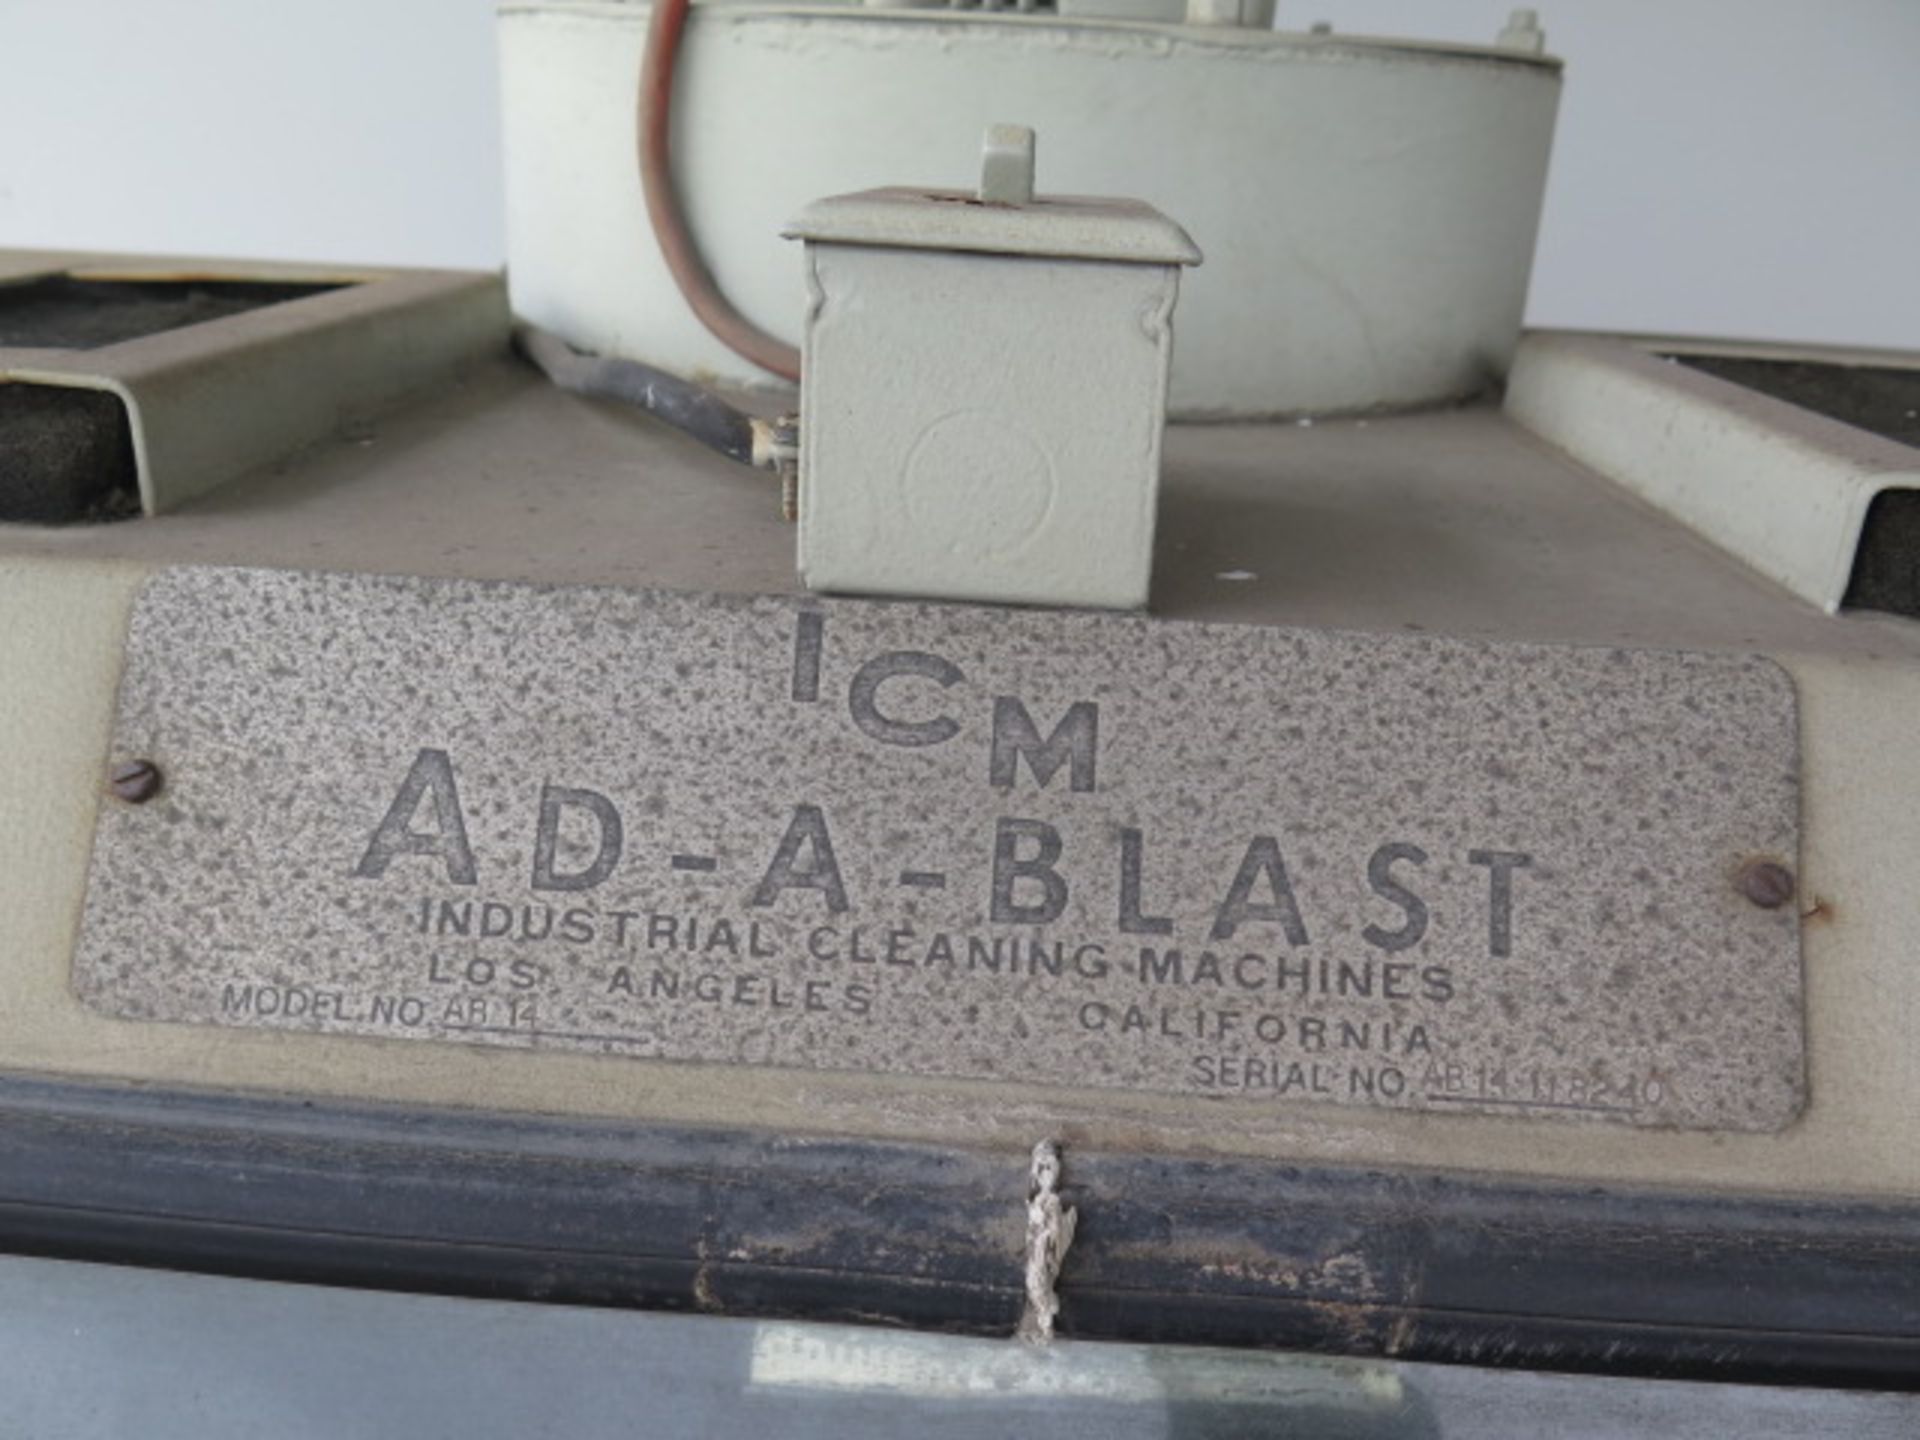 ICM Ad-A-Blast Dry Blast Cabinet (SOLD AS-IS - NO WARRANTY) - Image 7 of 7